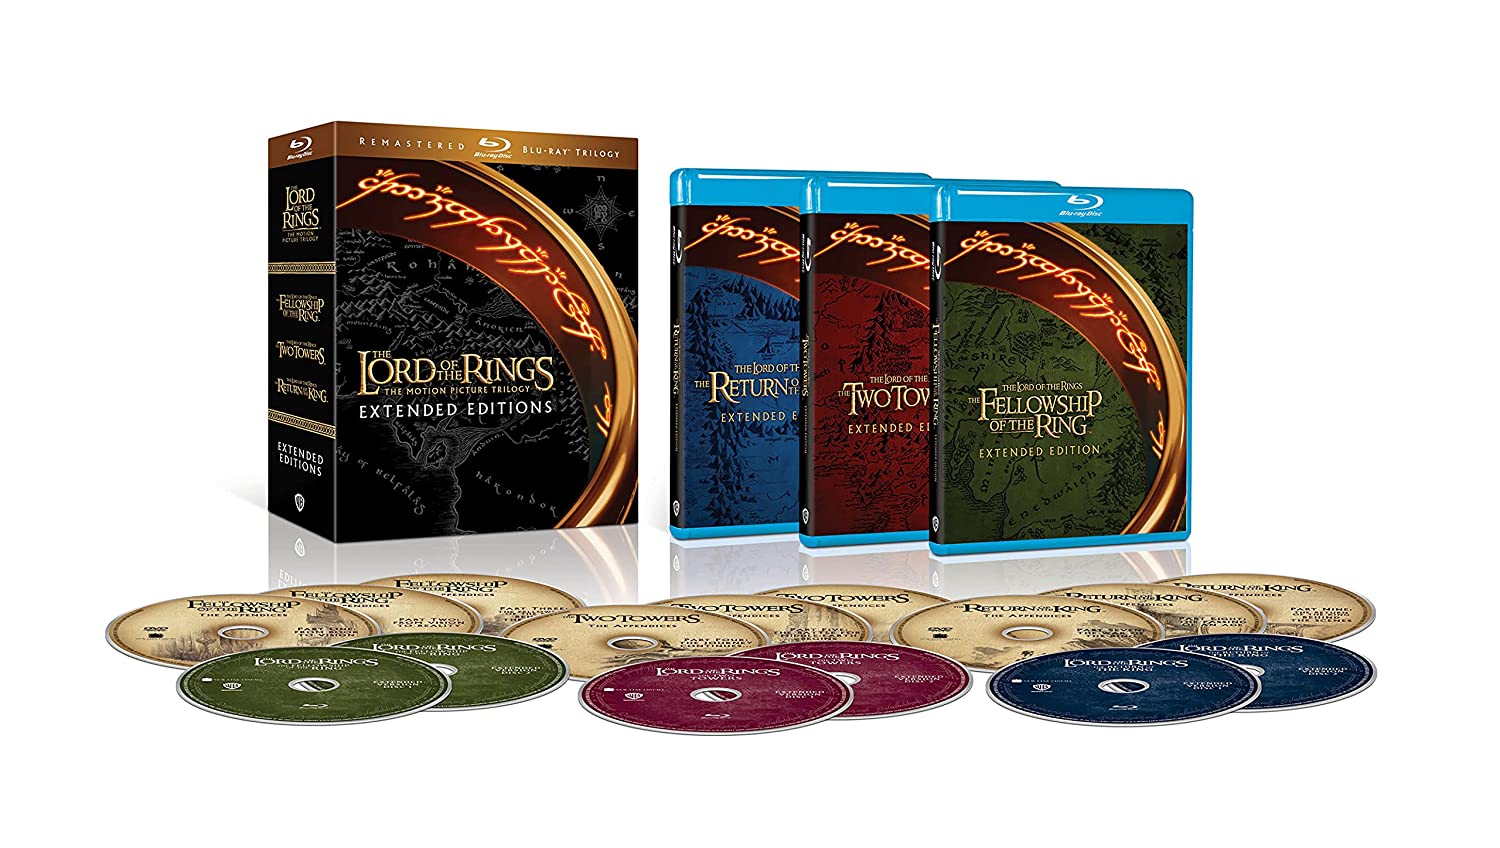 Gedwongen prioriteit Rijke man Lord of the Rings: Motion Picture Trilogy (Blu-ray Extended Edition) [USA]  | Hi-Def Ninja - Pop Culture - Movie Collectible Community